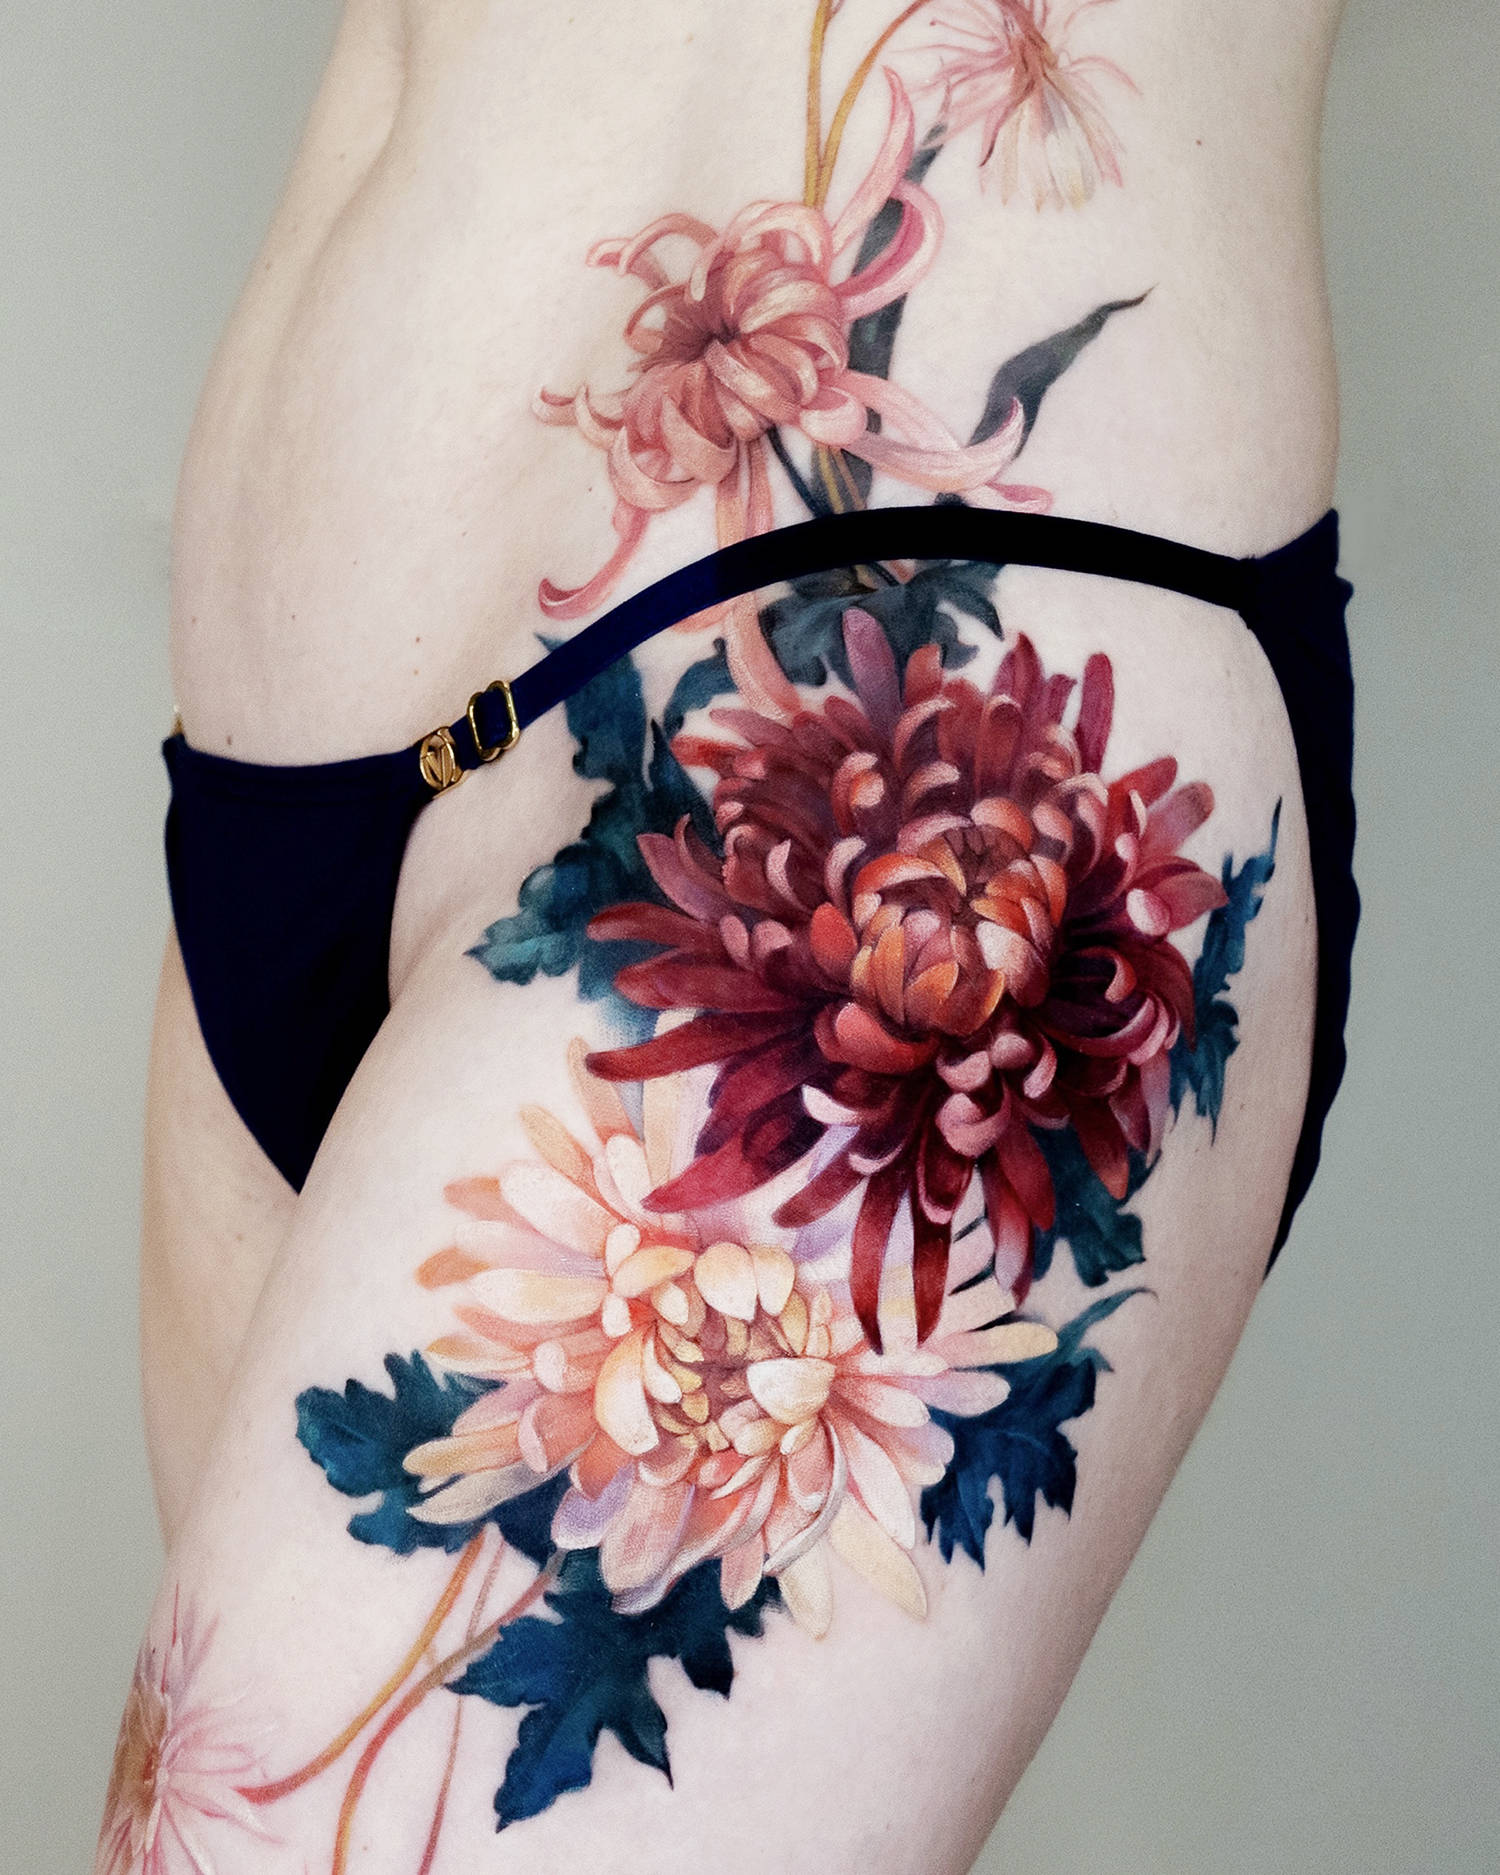 Chrysanthemums have evolved into a timeless tattoo motif